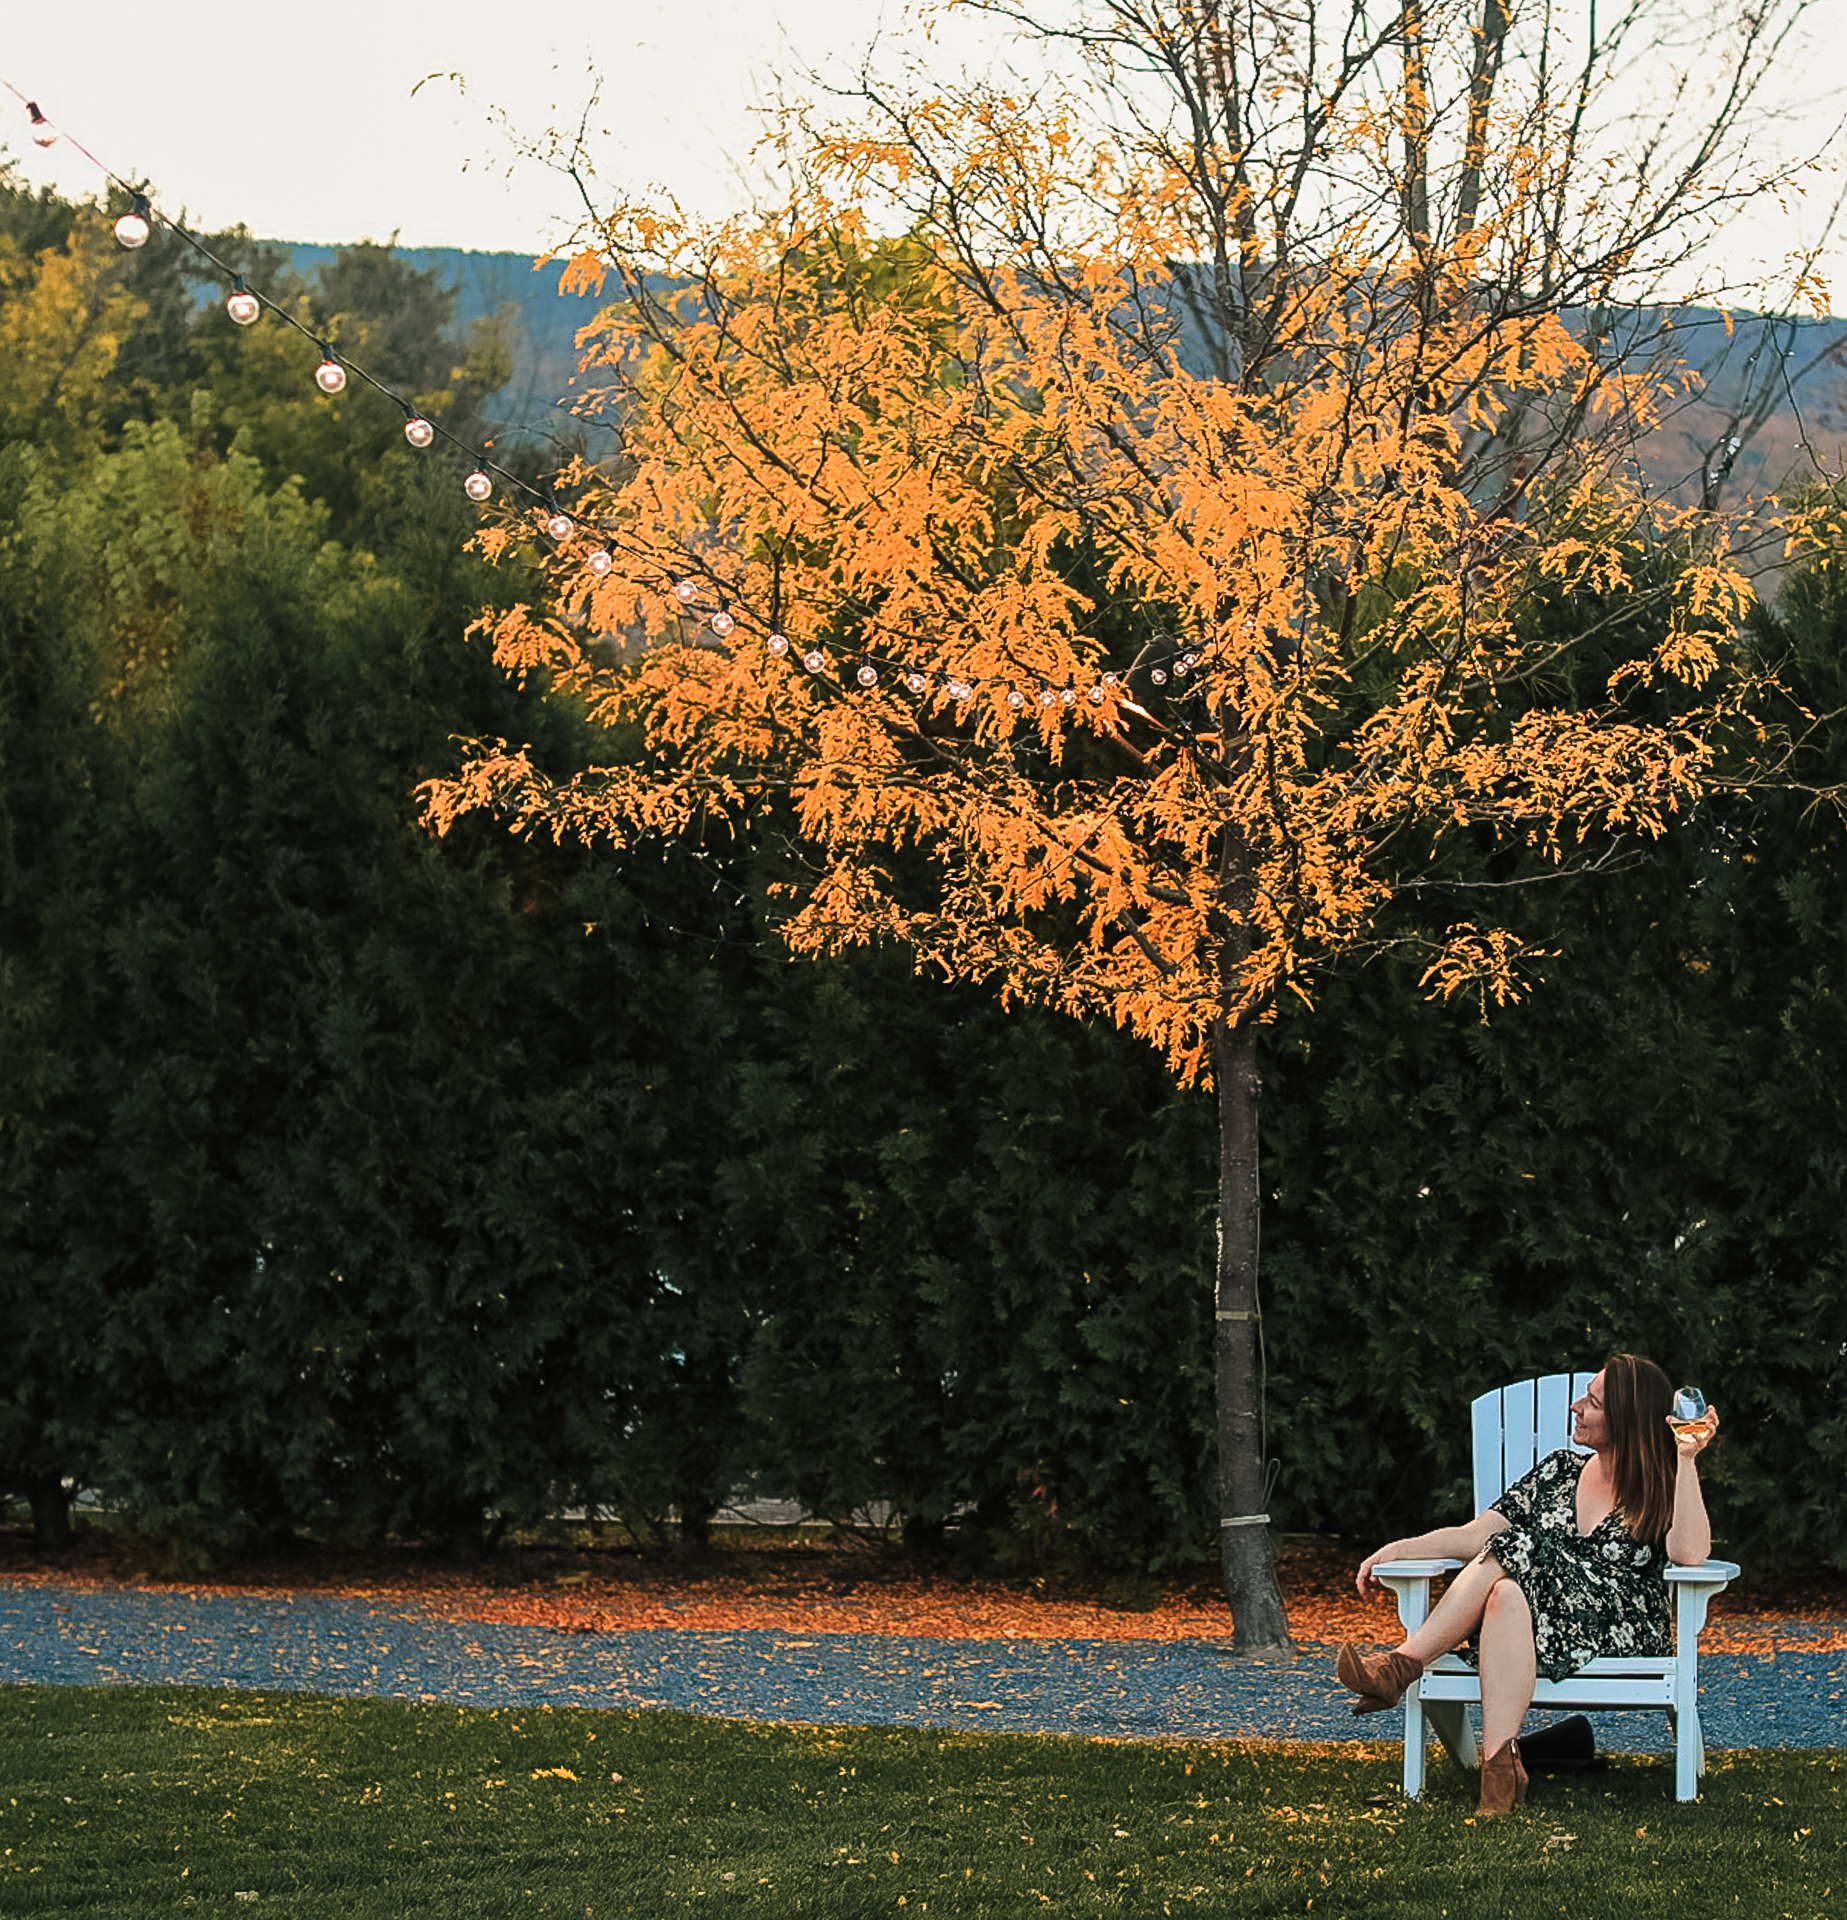 Manchester Vermont Fall Foliage Tour featured by top Boston travel blog, Sunny Coastlines: kimpton taconic hotel